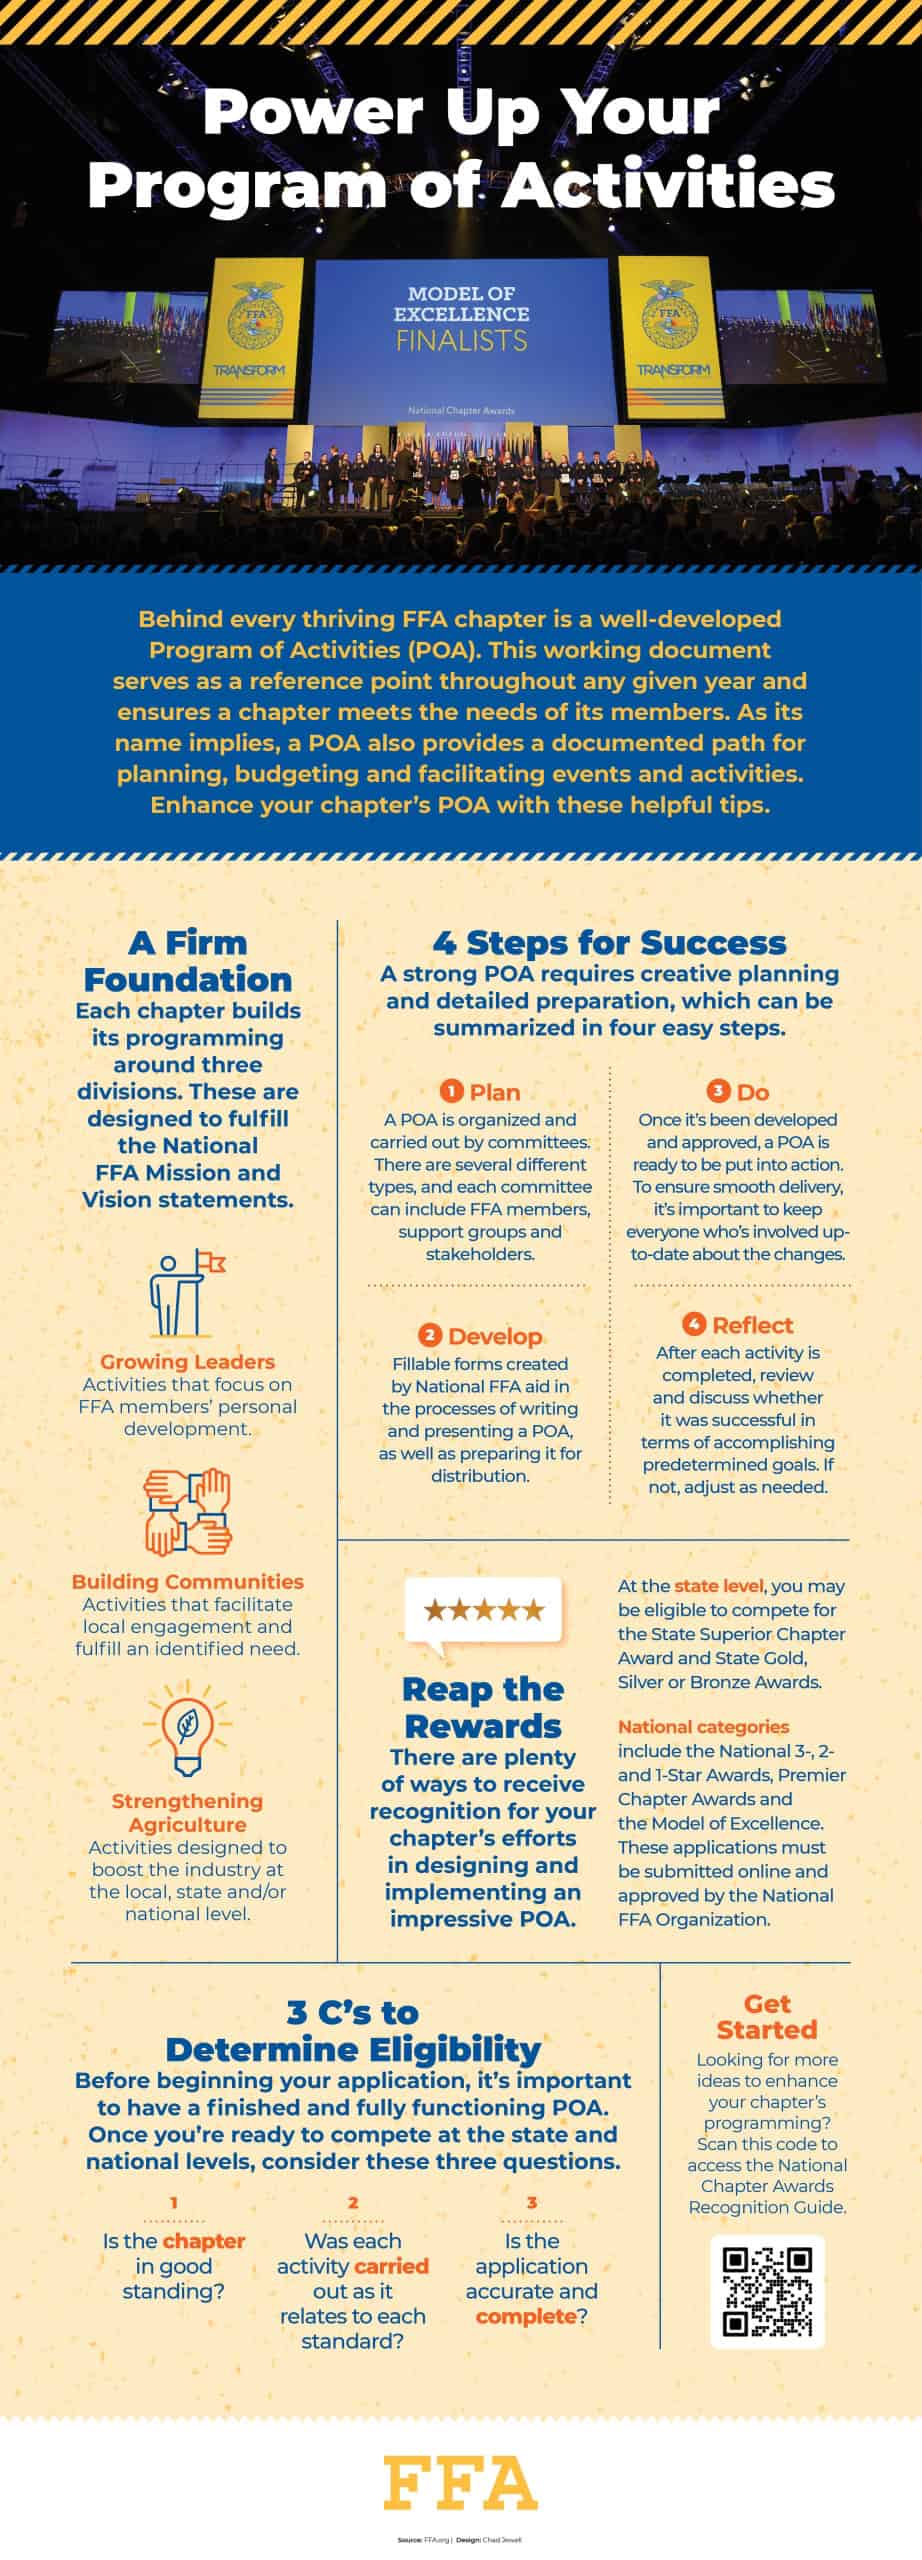 Infographic detailing steps for success and tips for FFA chapters looking to strengthen their Program of Activities.